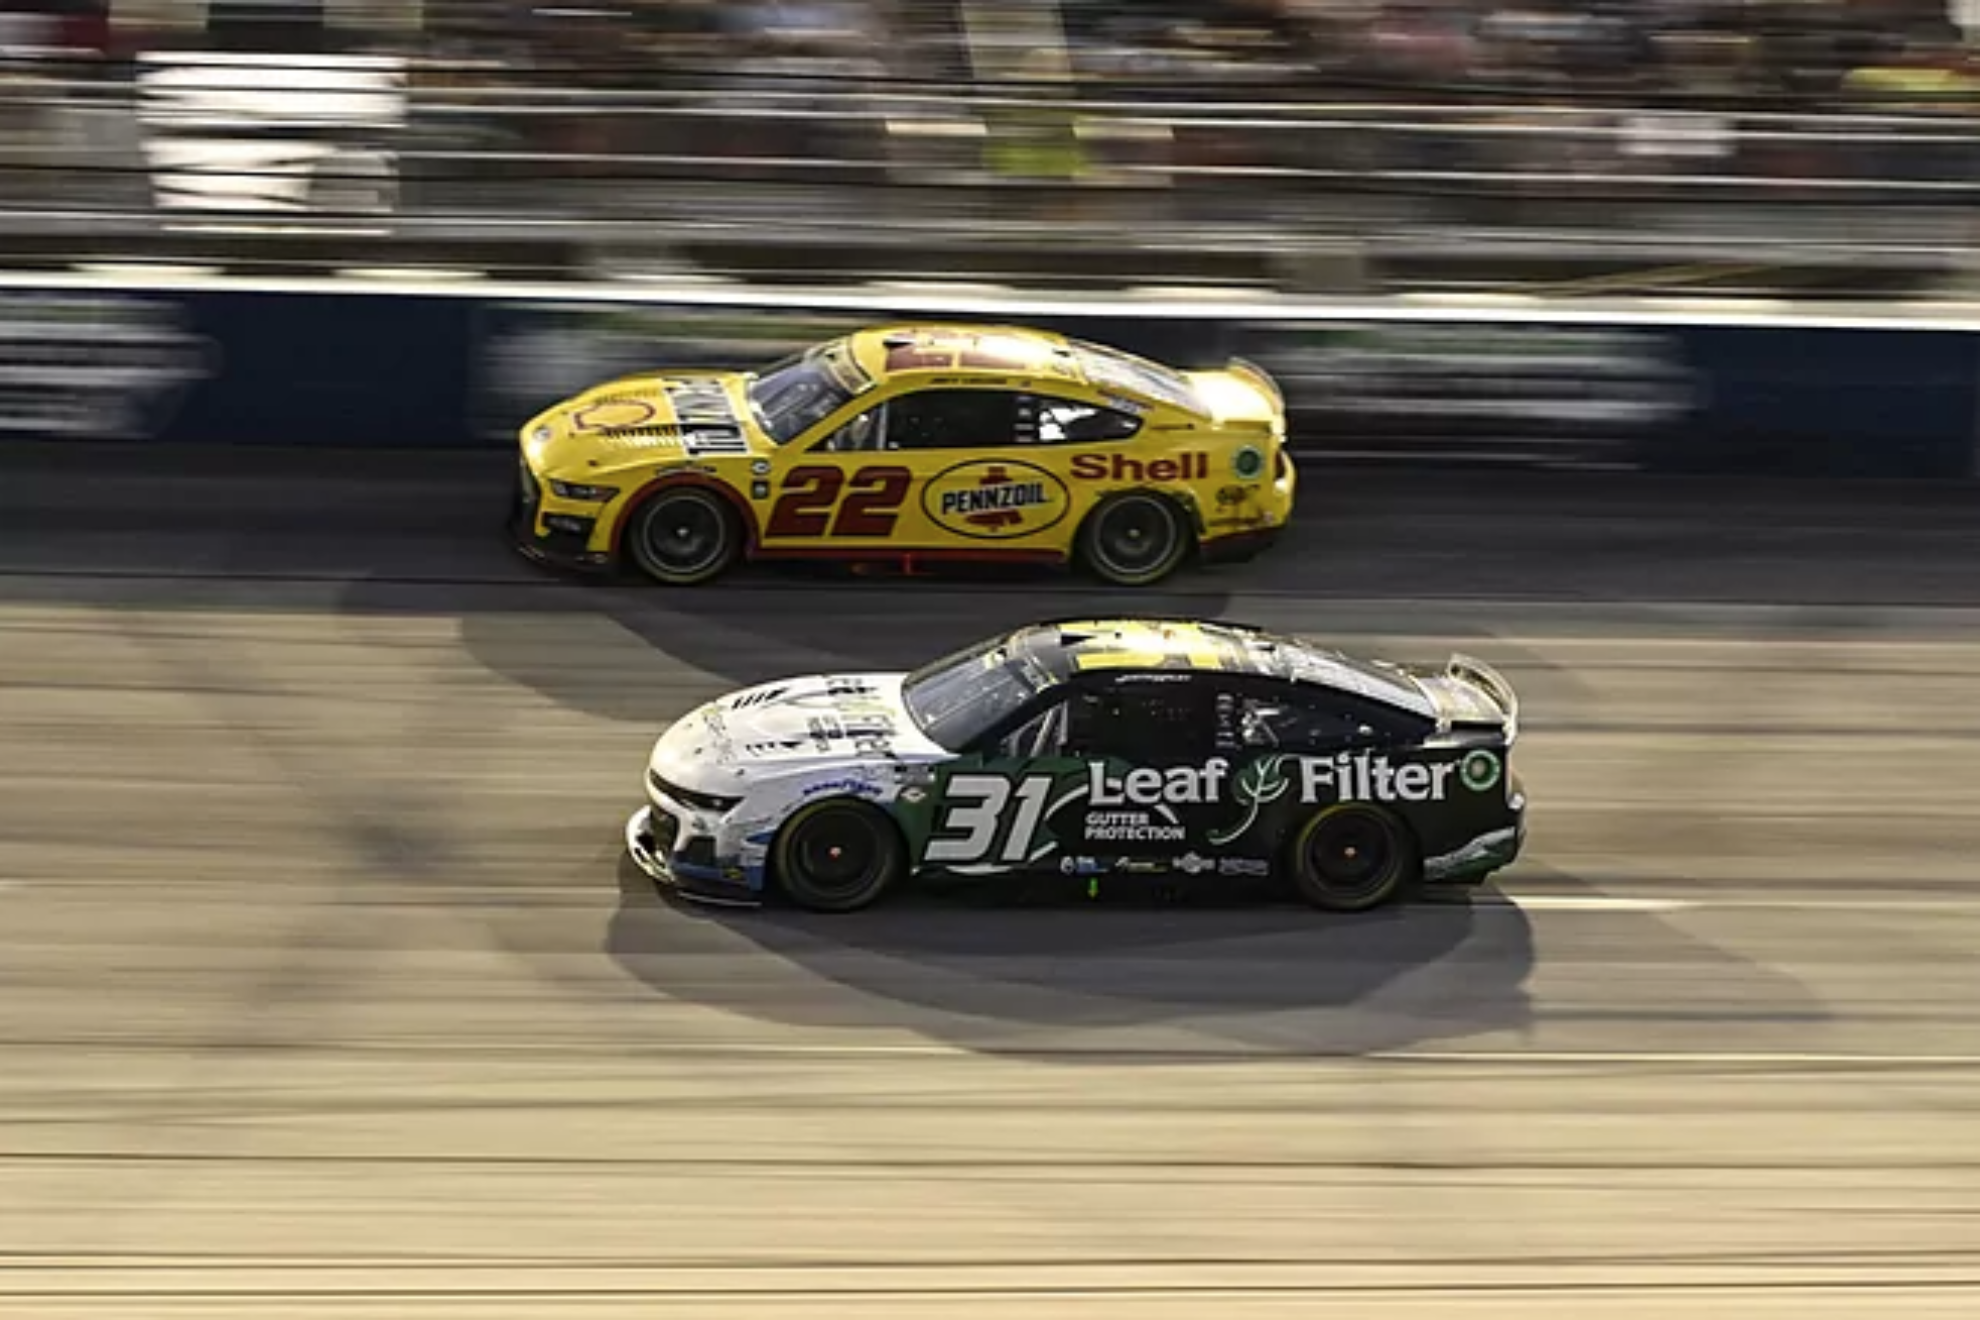 Hollywood Casino 400 Predictions: Who are the favored drivers to win this weekend?